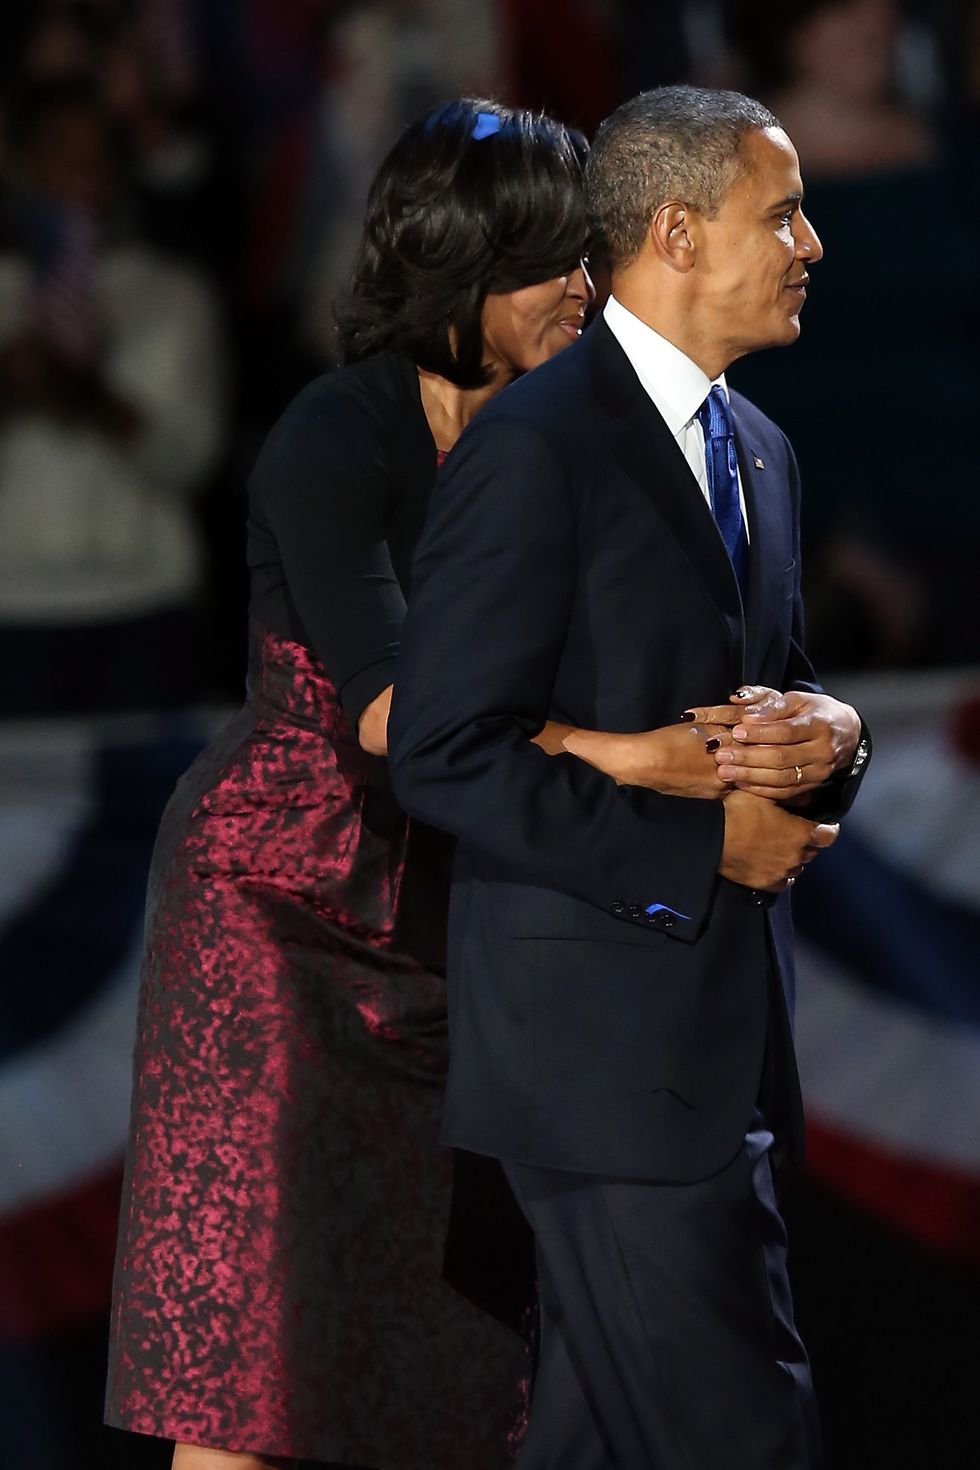 chicago, il   november 06  us president barack obama stands on stage with first lady michelle obama after his victory speech on election night at mccormick place november 6, 2012 in chicago, illinois obama won reelection against republican candidate, former massachusetts governor mitt romney  photo by scott olsongetty images